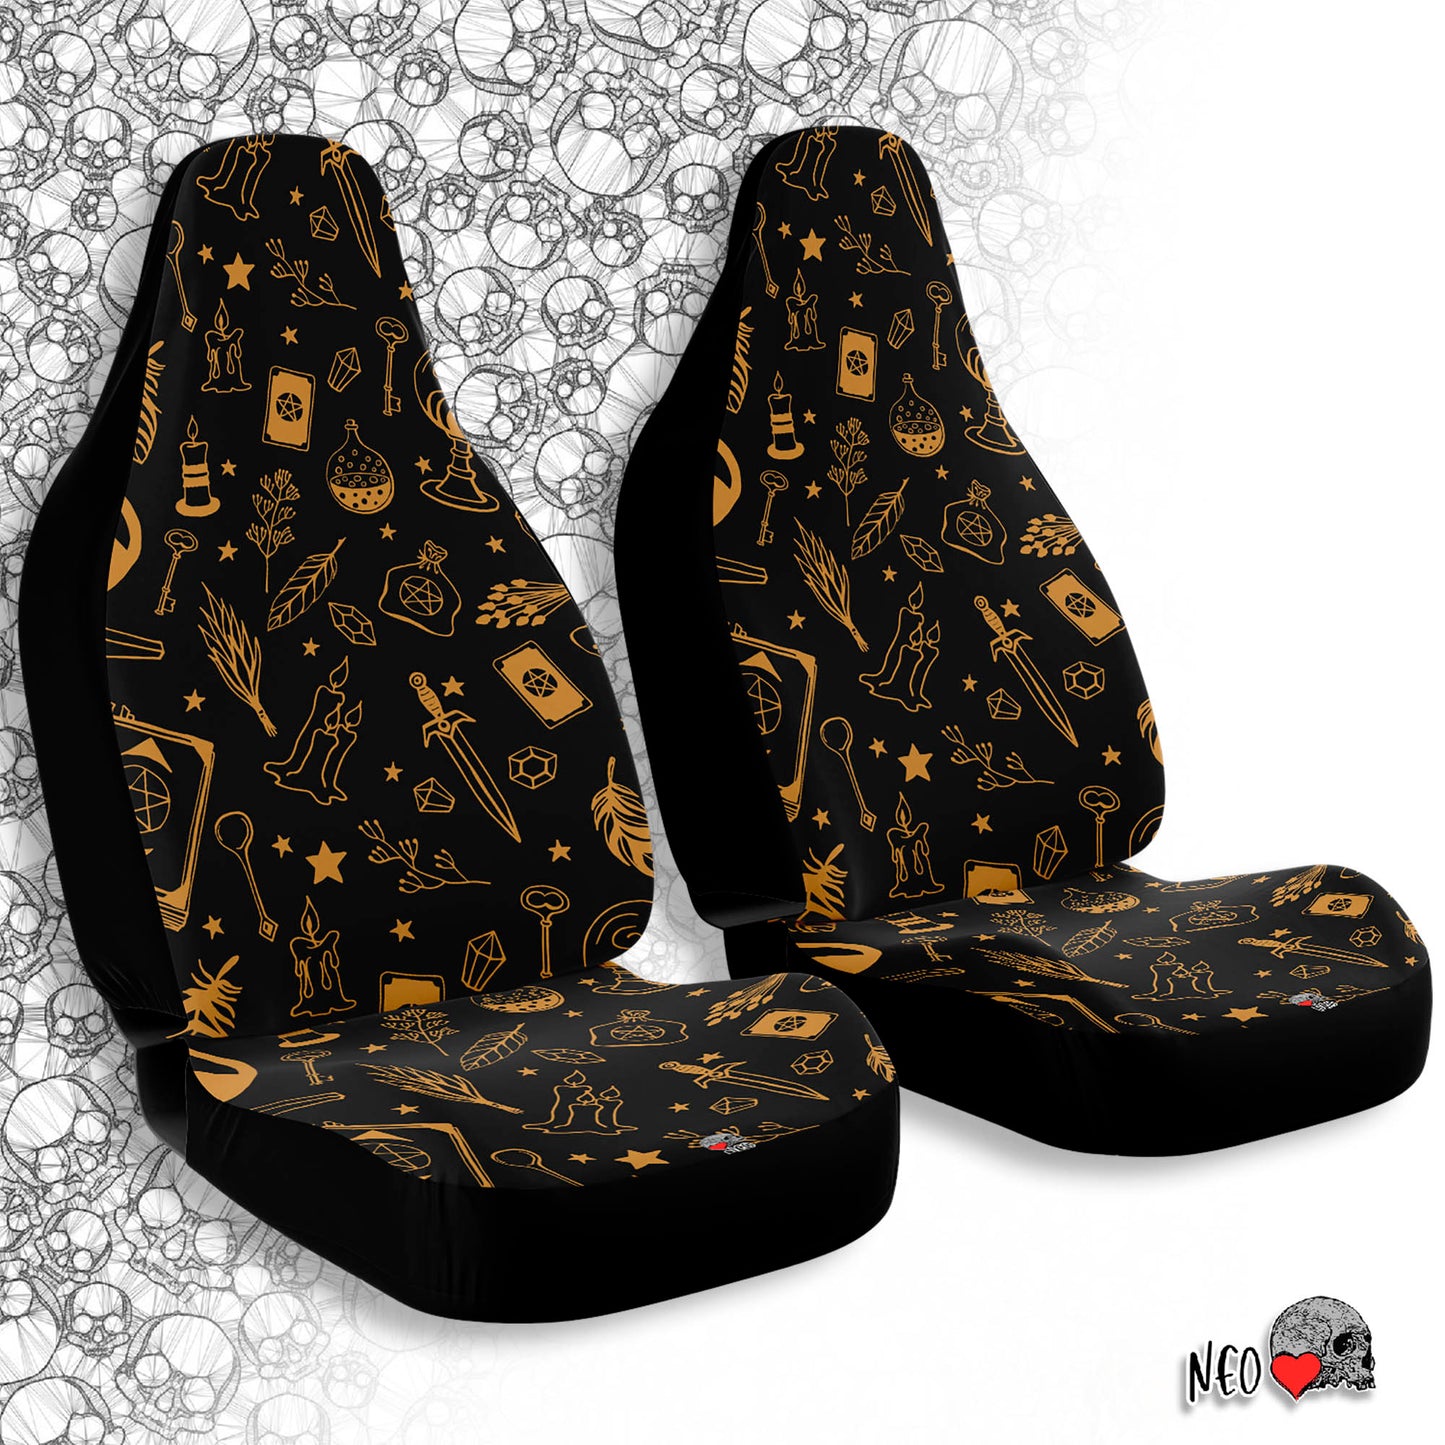 Witches and Wizards Car Seat Covers